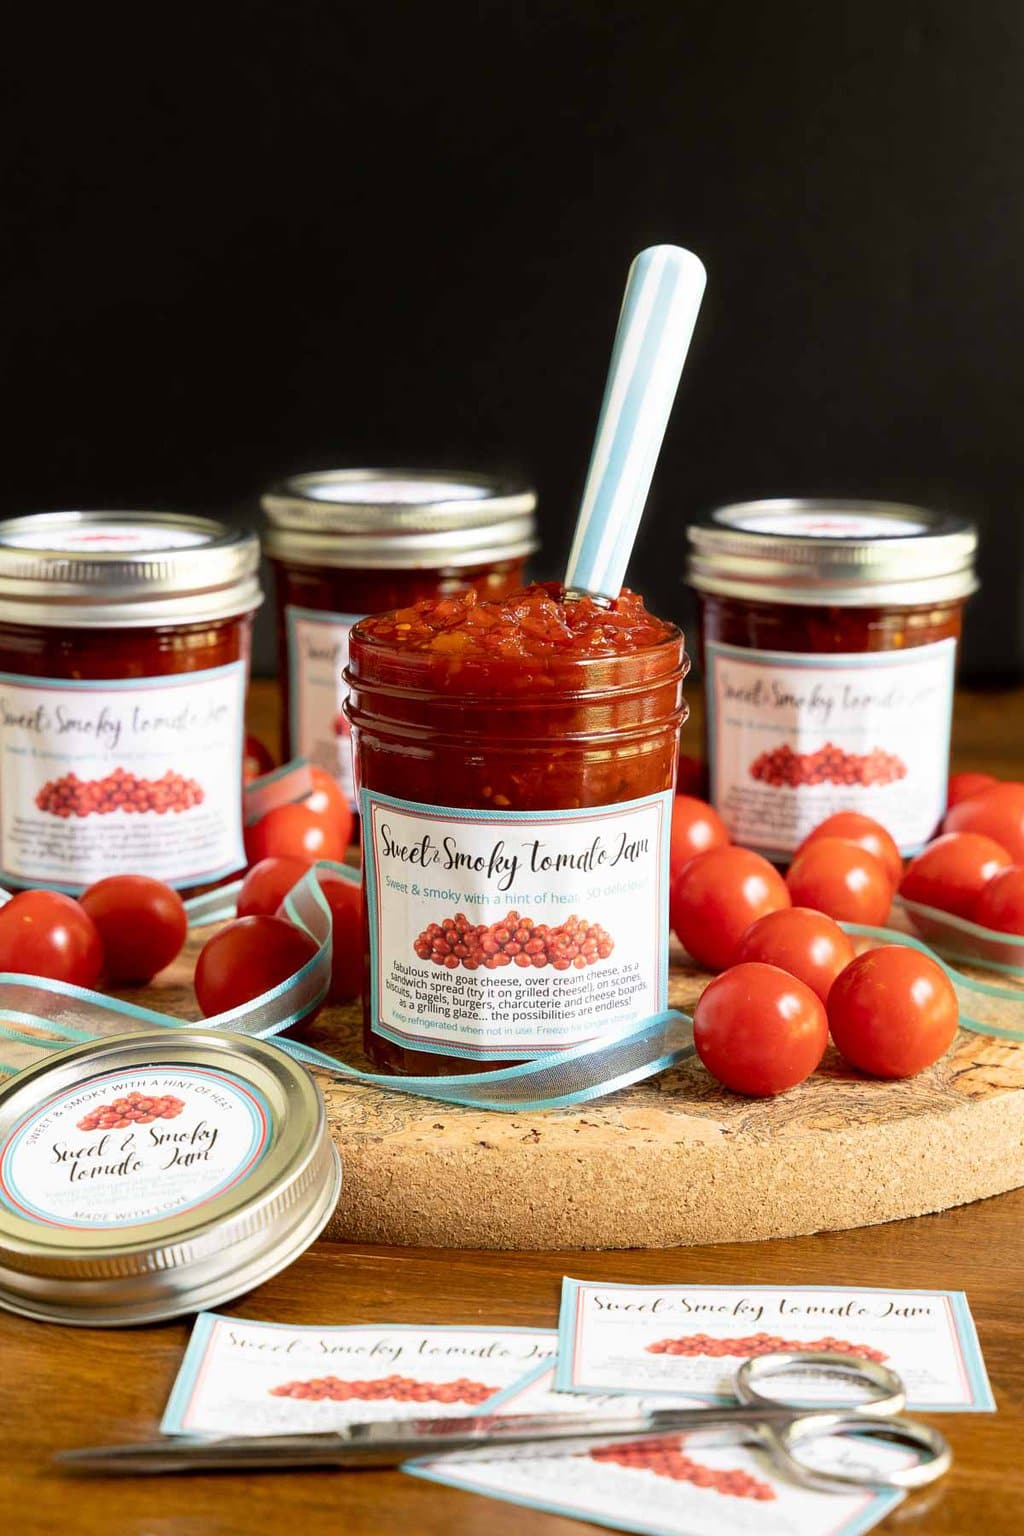 Vertical picture of Sweet and Smoky Tomato Jam in glass jars with labels